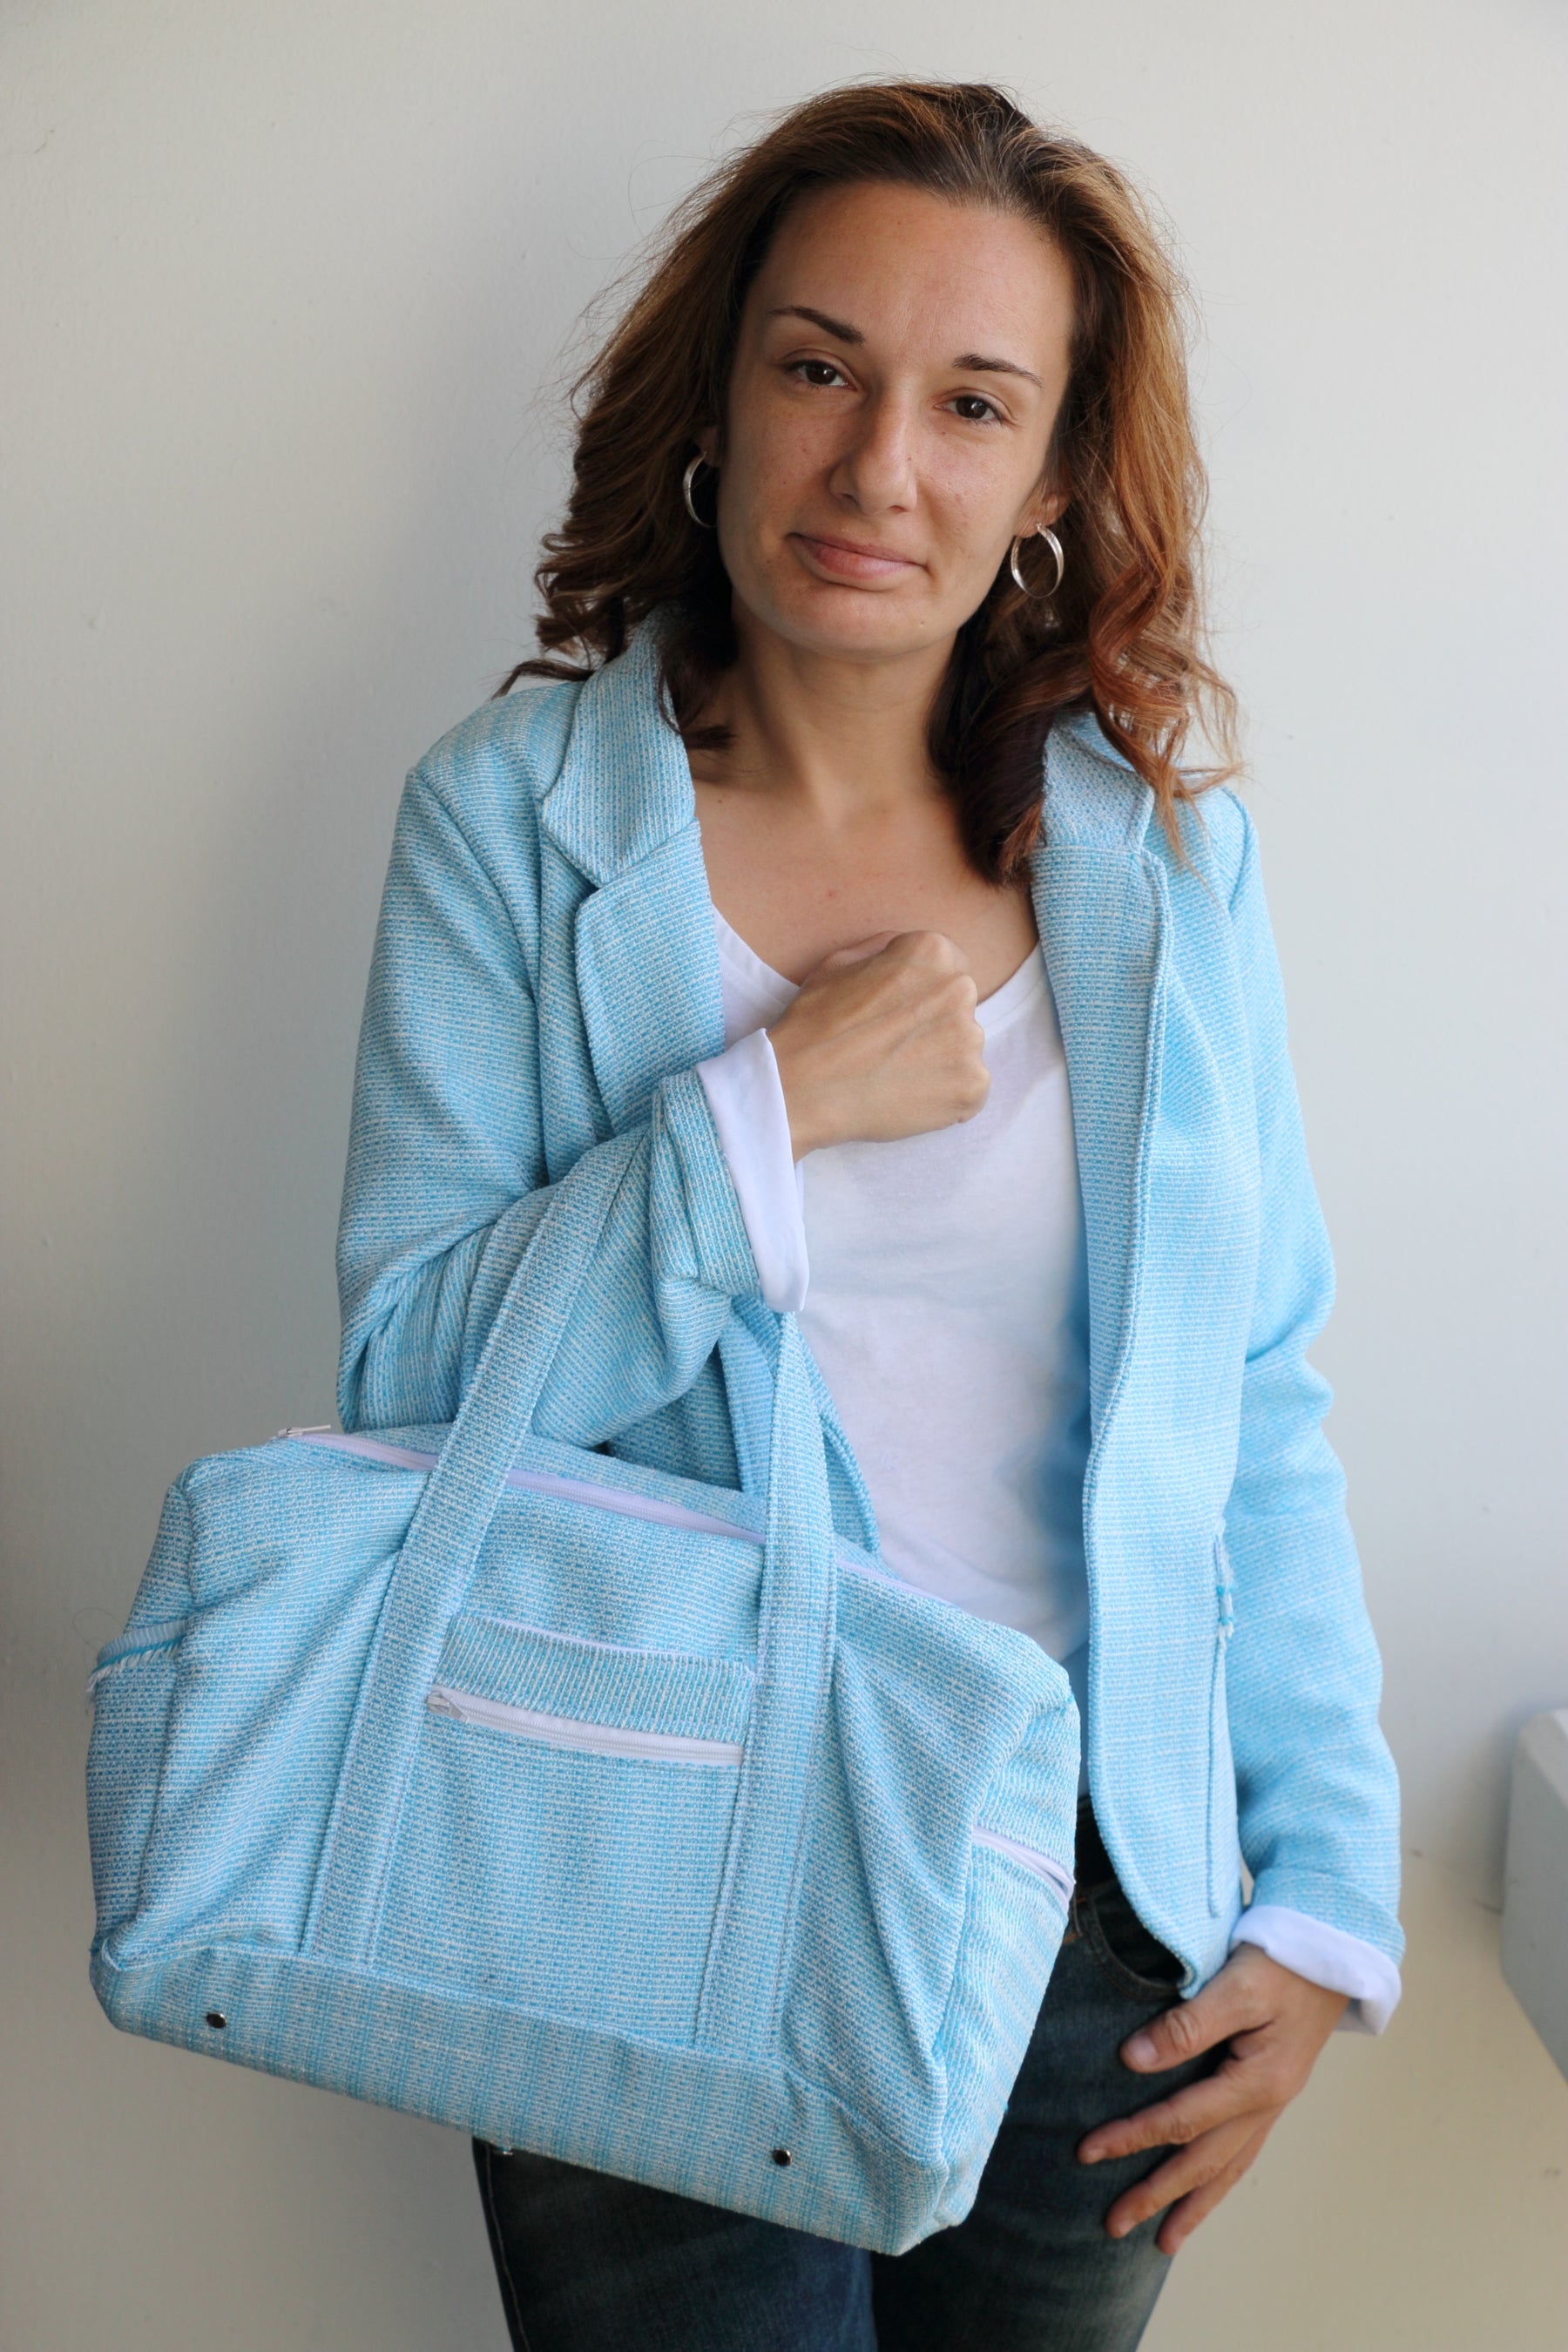 Day To Day Duffle Bag Sewing Pattern